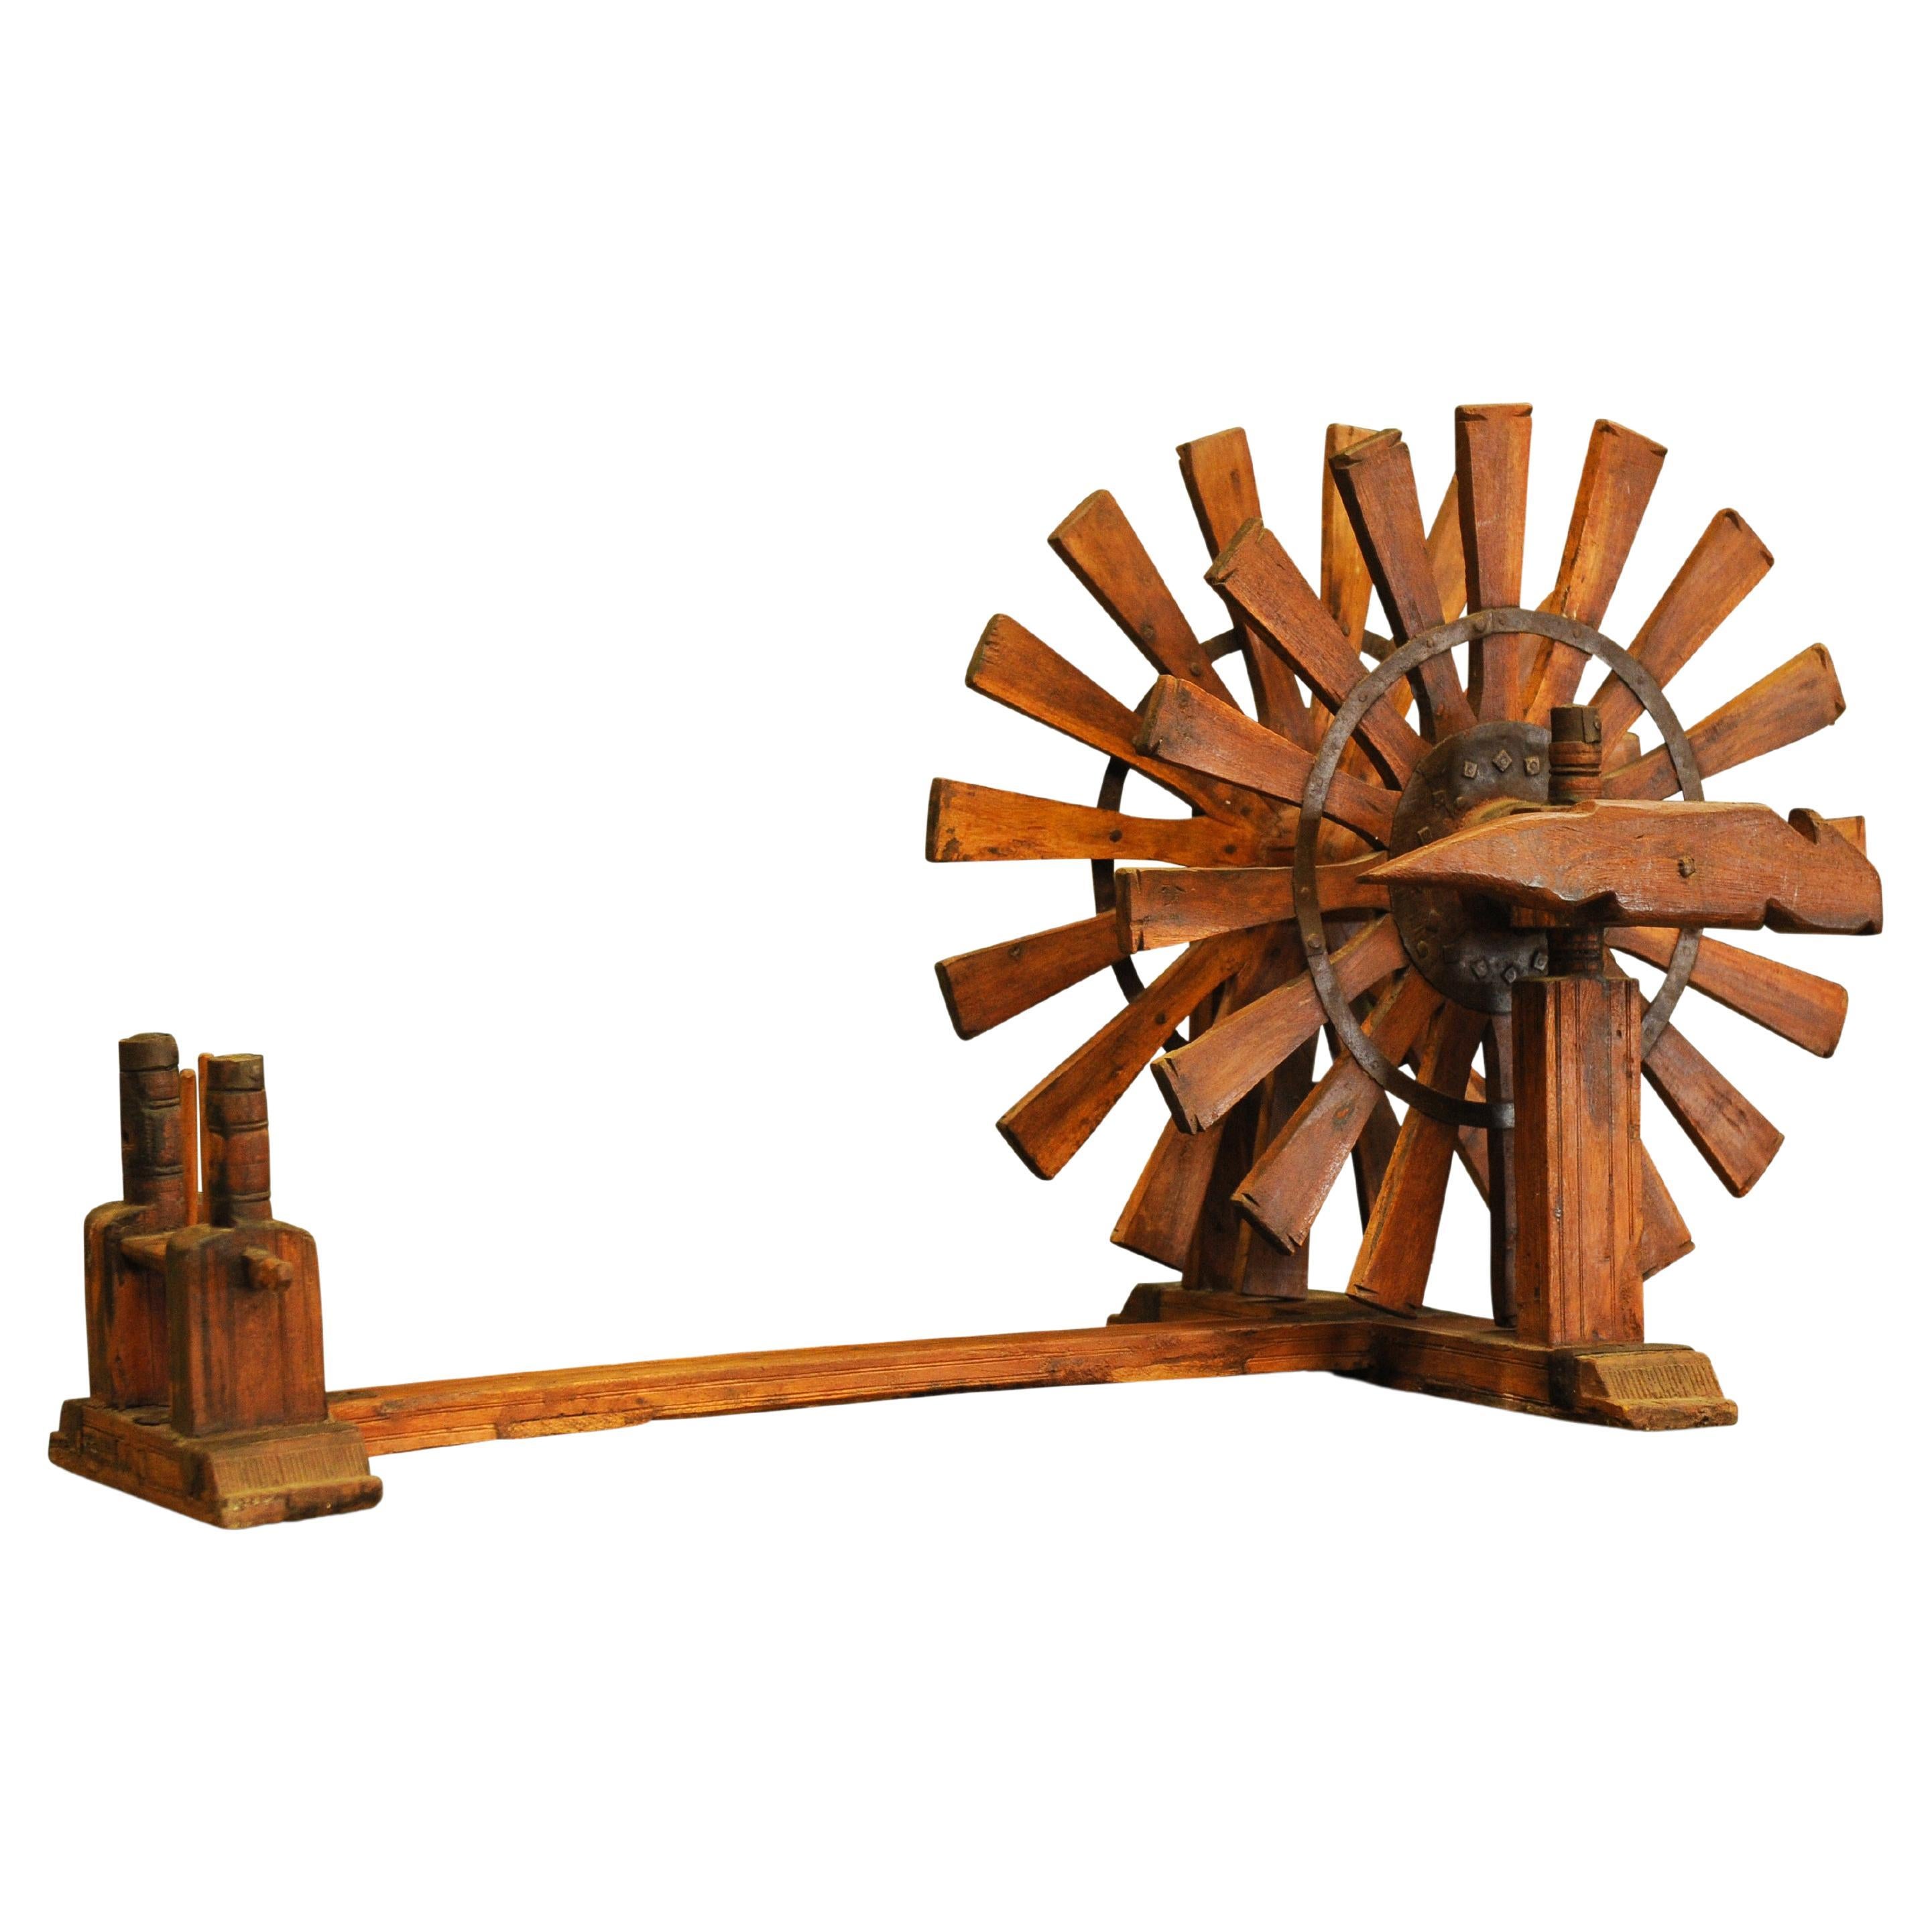 A Beautiful Example of An Antique Early 20th Century Hand Crafted Indian Hardwood Spinning Wheel or Charka.

The tabletop or floor charkha is one of the oldest known forms of the spinning wheel. The charkha works with a drive wheel being turned by